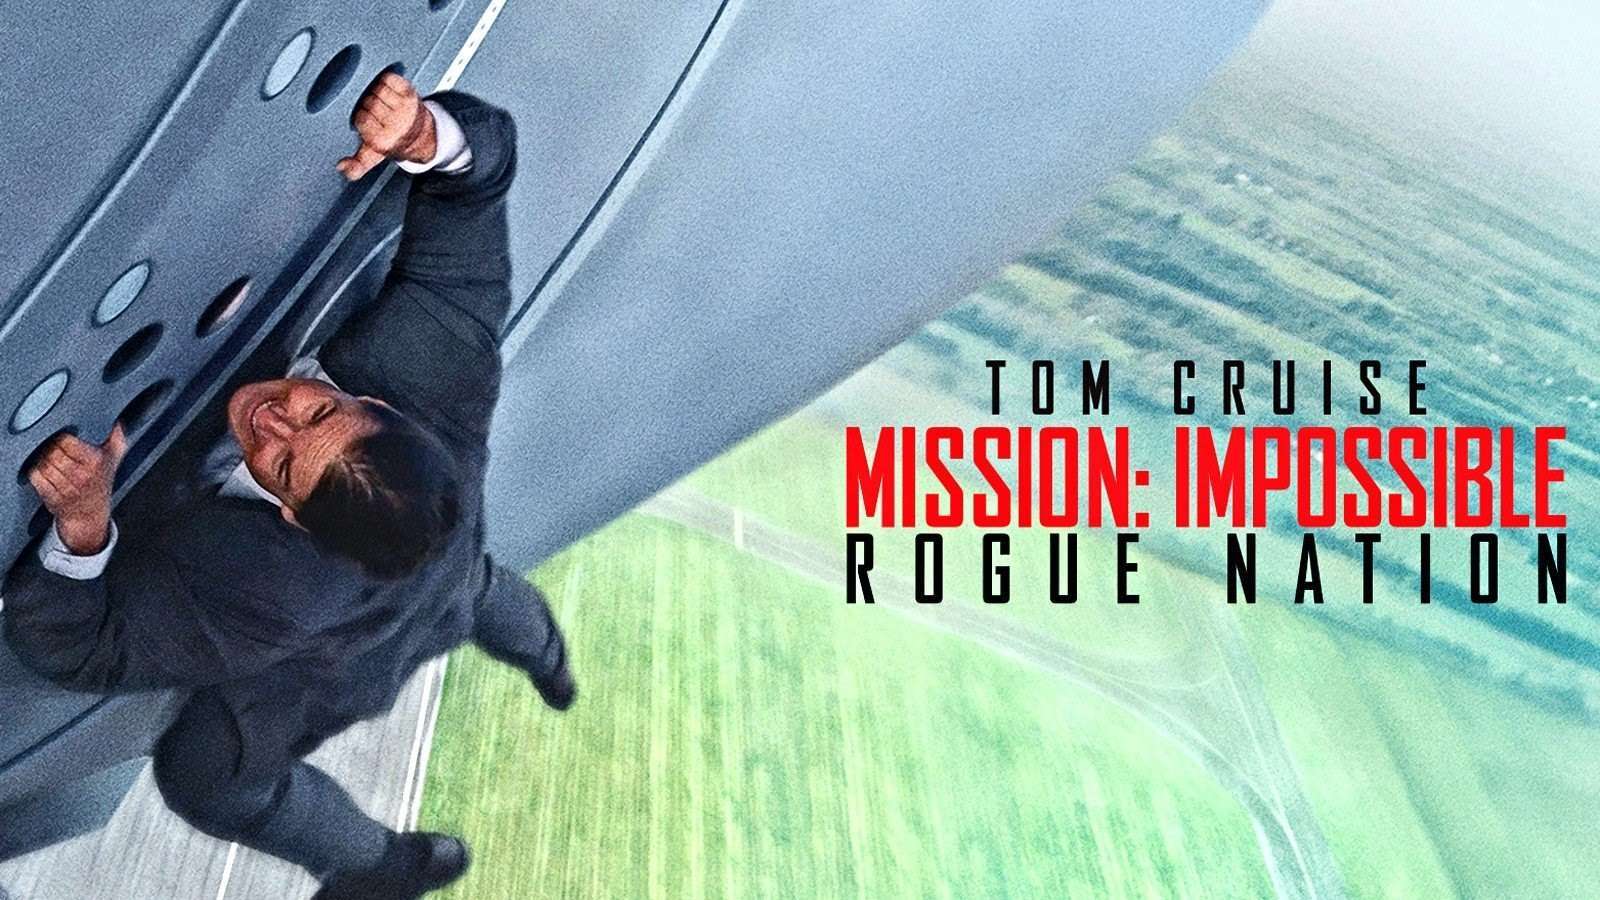 Best Buy just released the MISSION: IMPOSSIBLE ROGUE NATION Blu-ray Steelbook